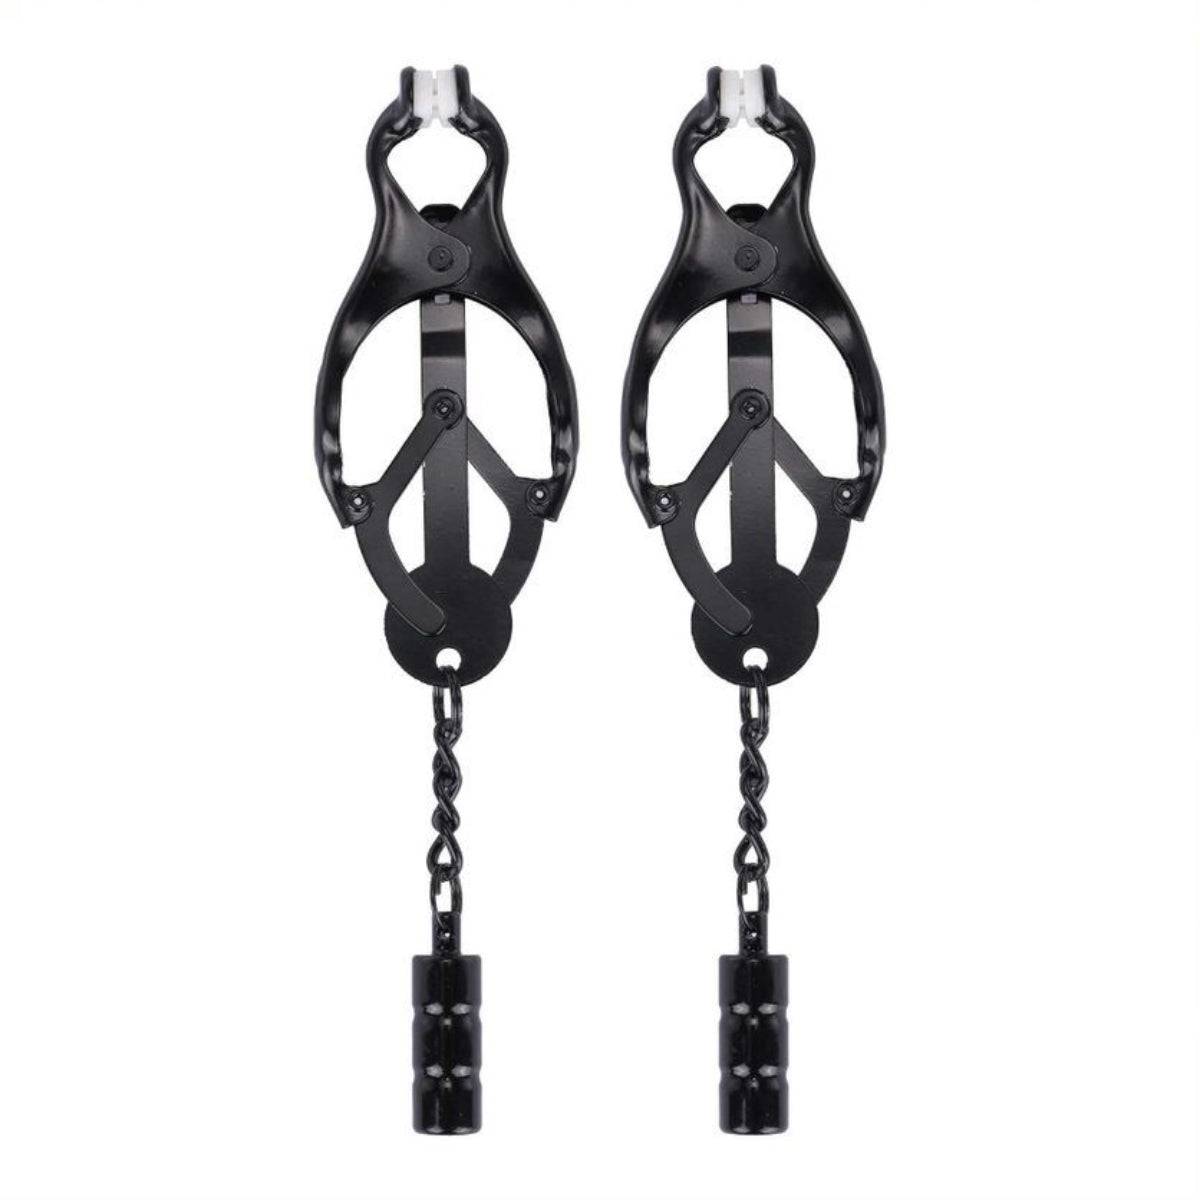 Front View Product - Me You Us Clover Nipple Clamps Black - Simply Pleasure